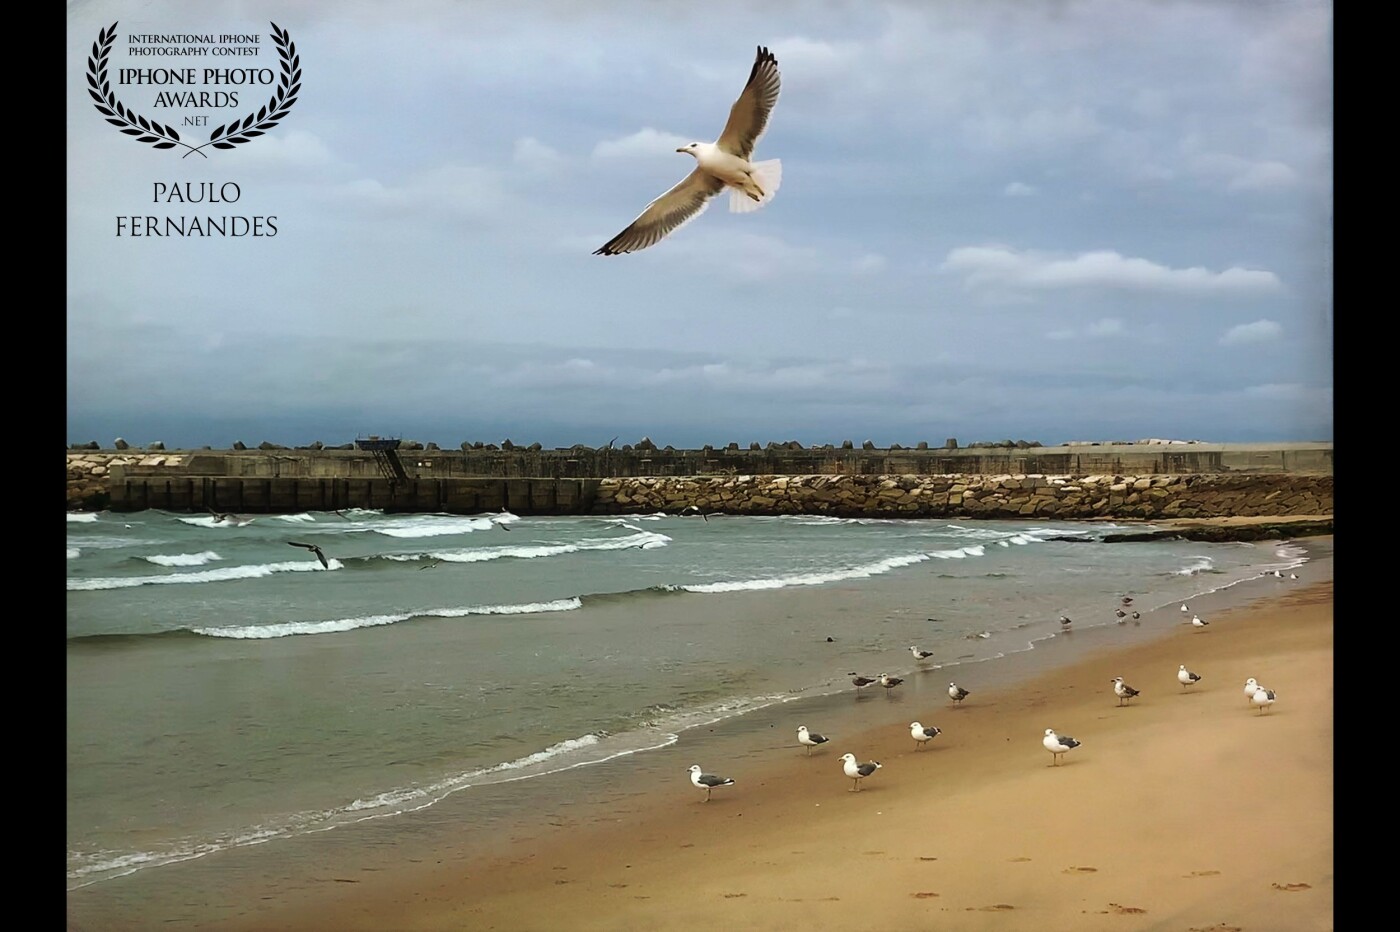 During the beach walk in Ericeira / Portugal in October 2020 I had the opportunity to catch the stretch of a flying seagull. No doubt for me to name that picture "s t r e t c h". The image has been taken with an iPhone Xs + Hipstamatic.